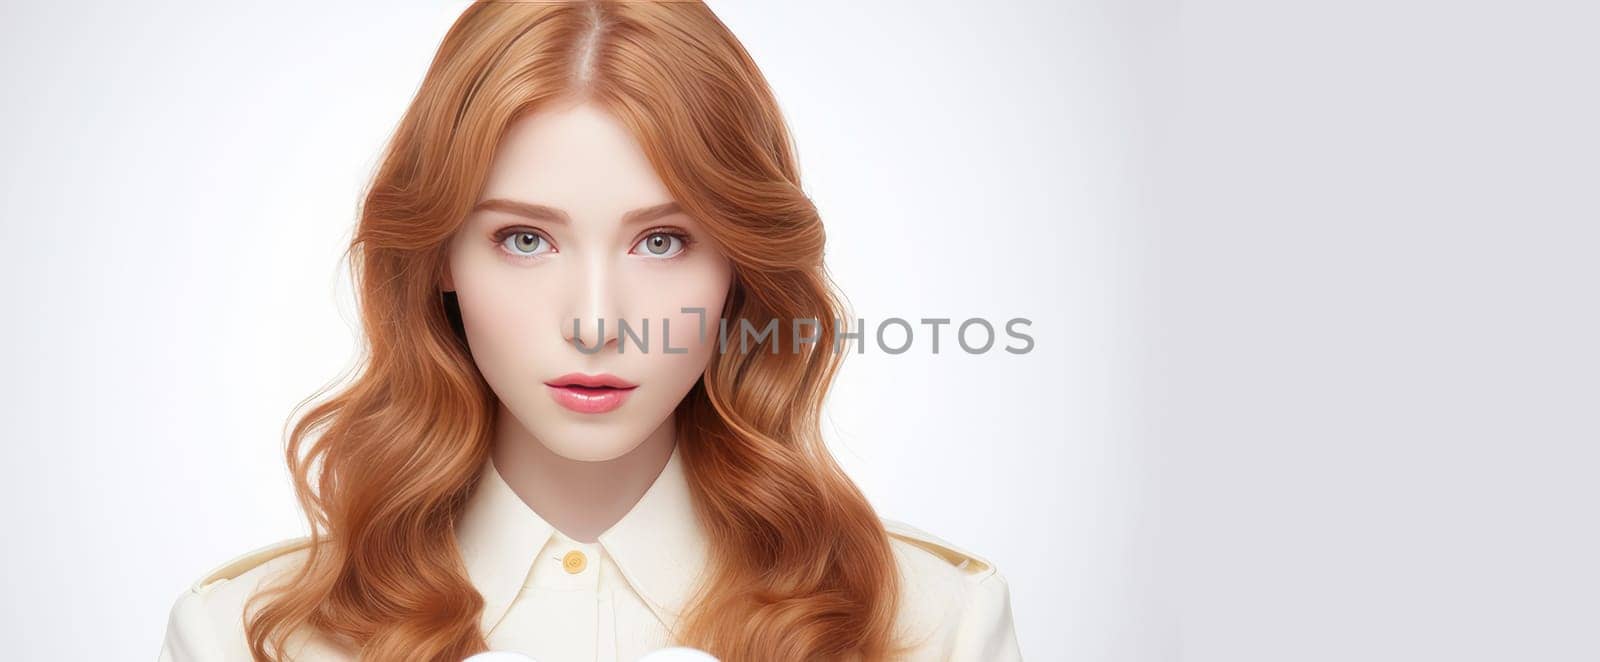 Young girl on a white background.